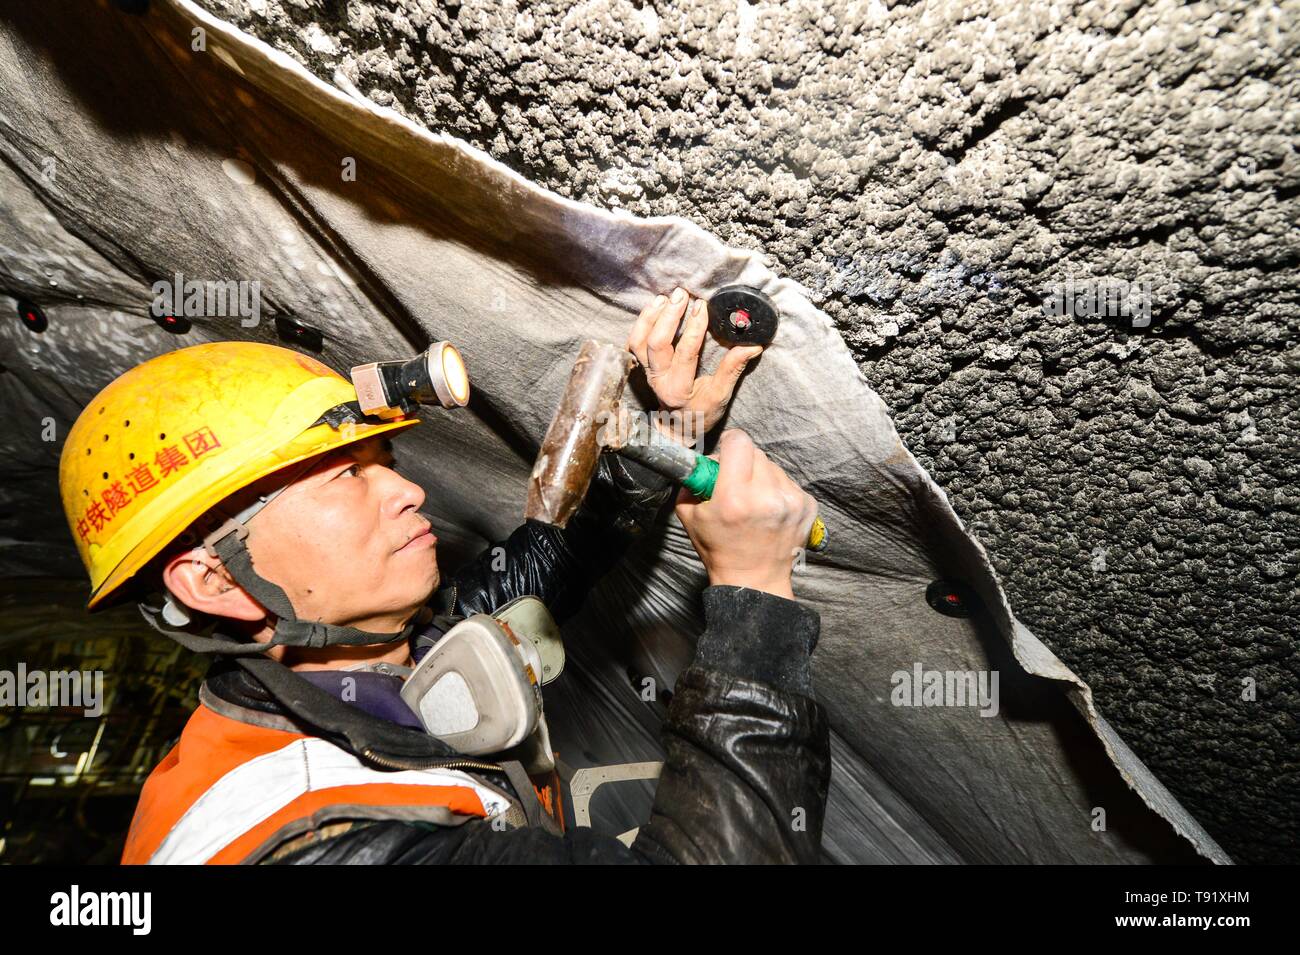 (190516) -- RUOQIANG, May 16, 2019 (Xinhua) -- Construction worker Zhong Yingxue operates waterproof task in the tunnel though Altun Mountains in Ruoqiang County, northwest China's Xinjiang Uygur Autonomous Region, May 15, 2019. The 13.195-kilometer-long tunnel through Altun Mountains is the longest tunnel of the Golmud-Korla railway line. The railway line, connecting Golmud in Qinghai and Korla in Xinjiang, is the third rail artery linking Xinjiang with neighboring provinces. The line will cut the traffic time between Golmud and Korla from 26 hours to 12 hours. (Xinhua/Ding Lei) Stock Photo